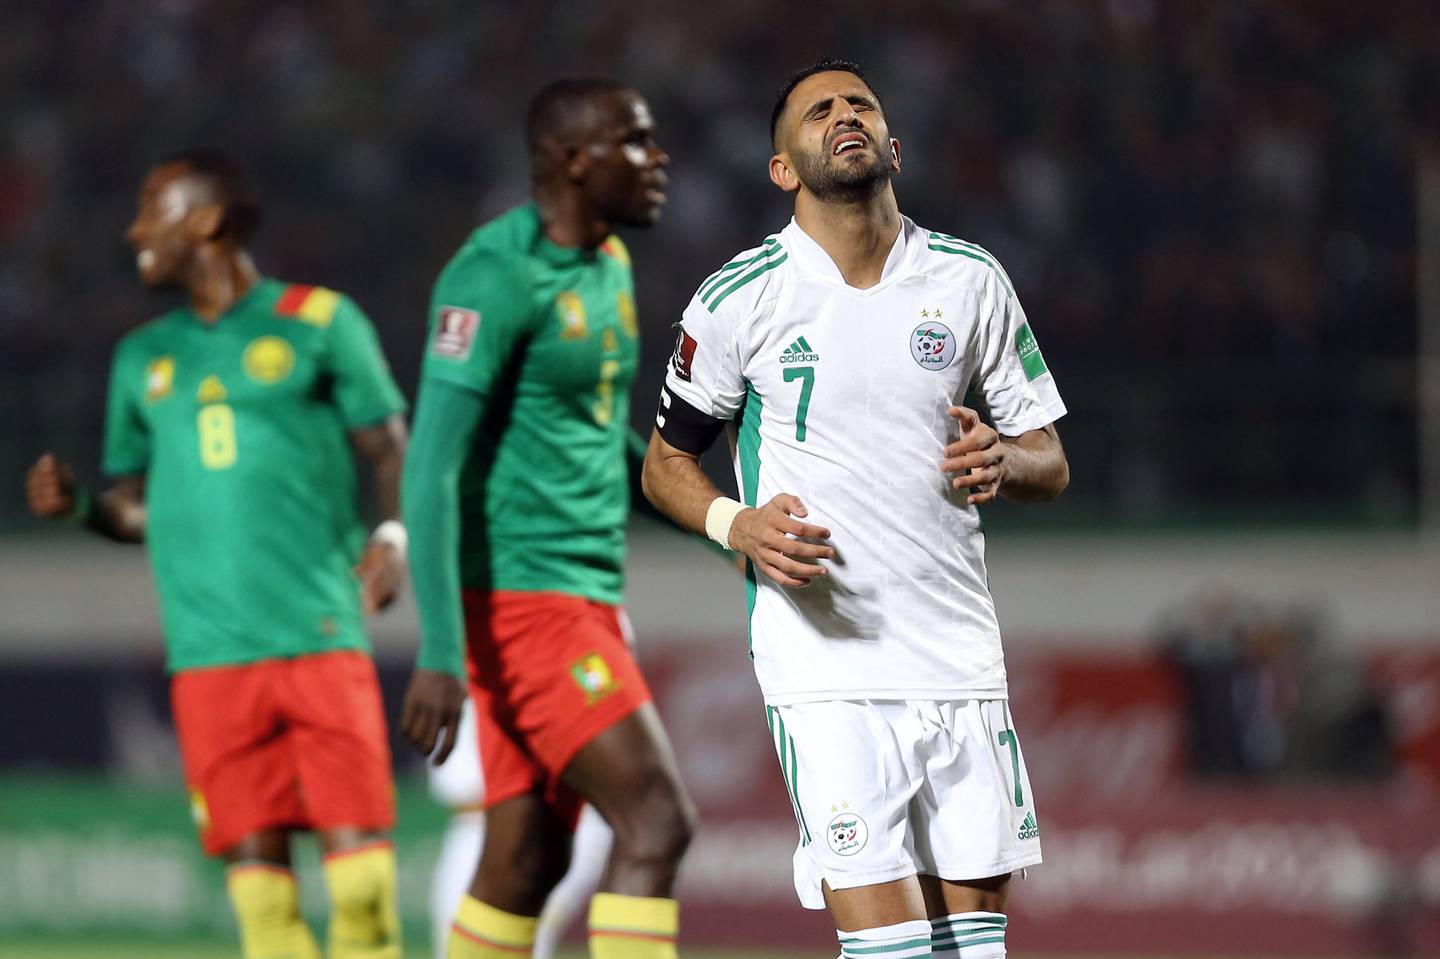 Riyad Mahrez shows his frustration during Algeria's World Cup qualifying defeat against Cameroon on Tuesday. AP